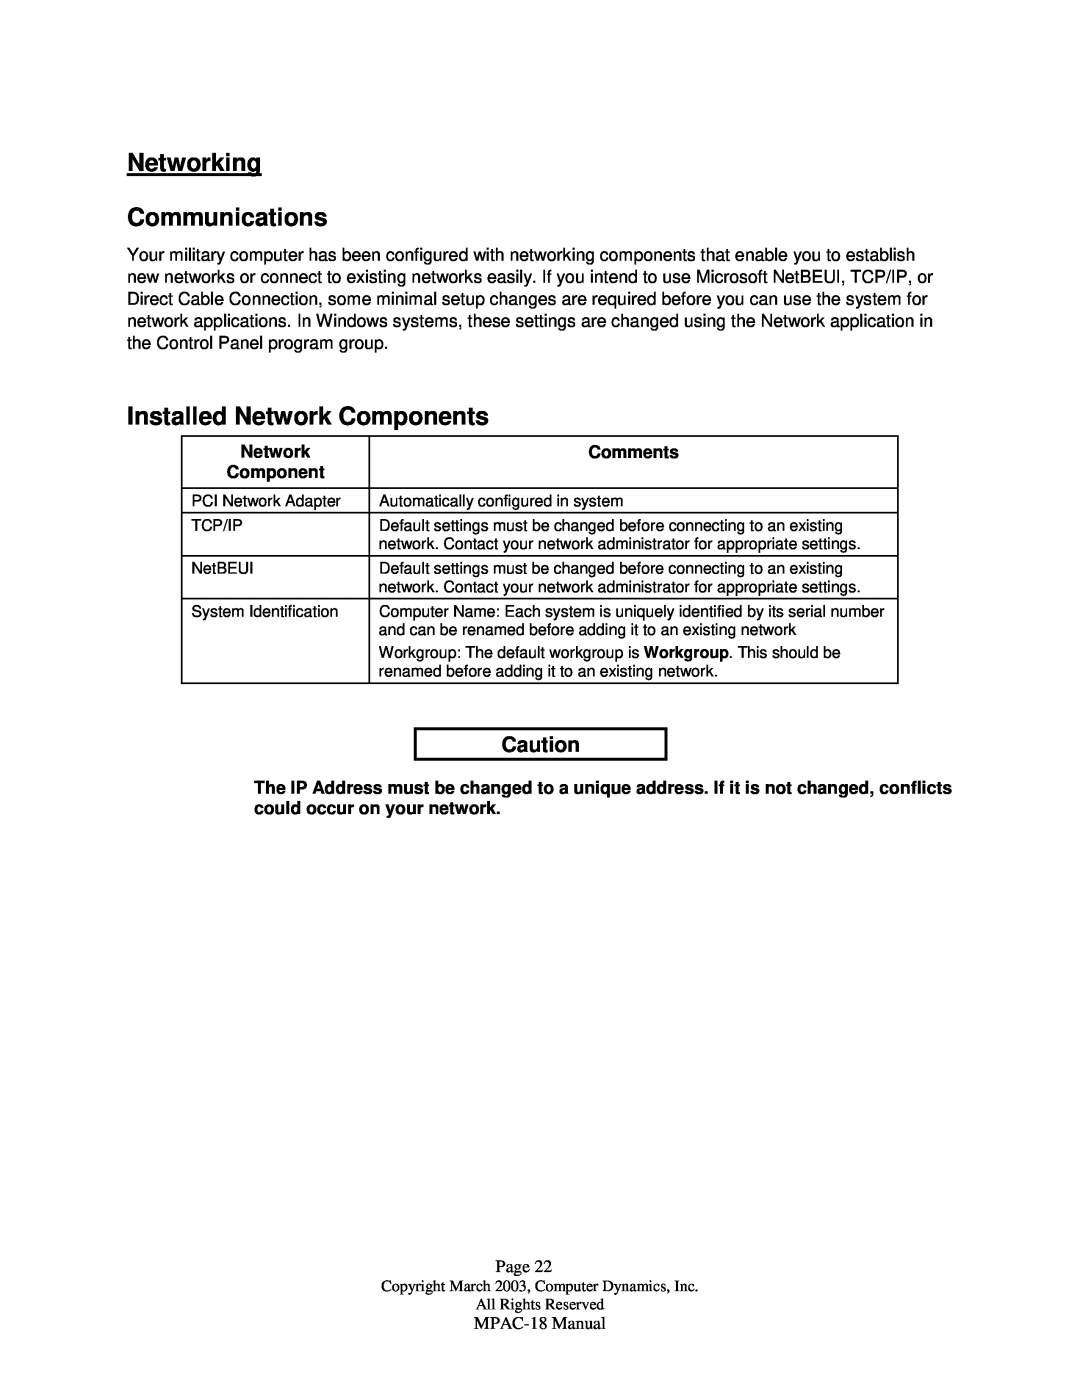 Compaq MPAC-18 manual Networking Communications, Installed Network Components, Comments 